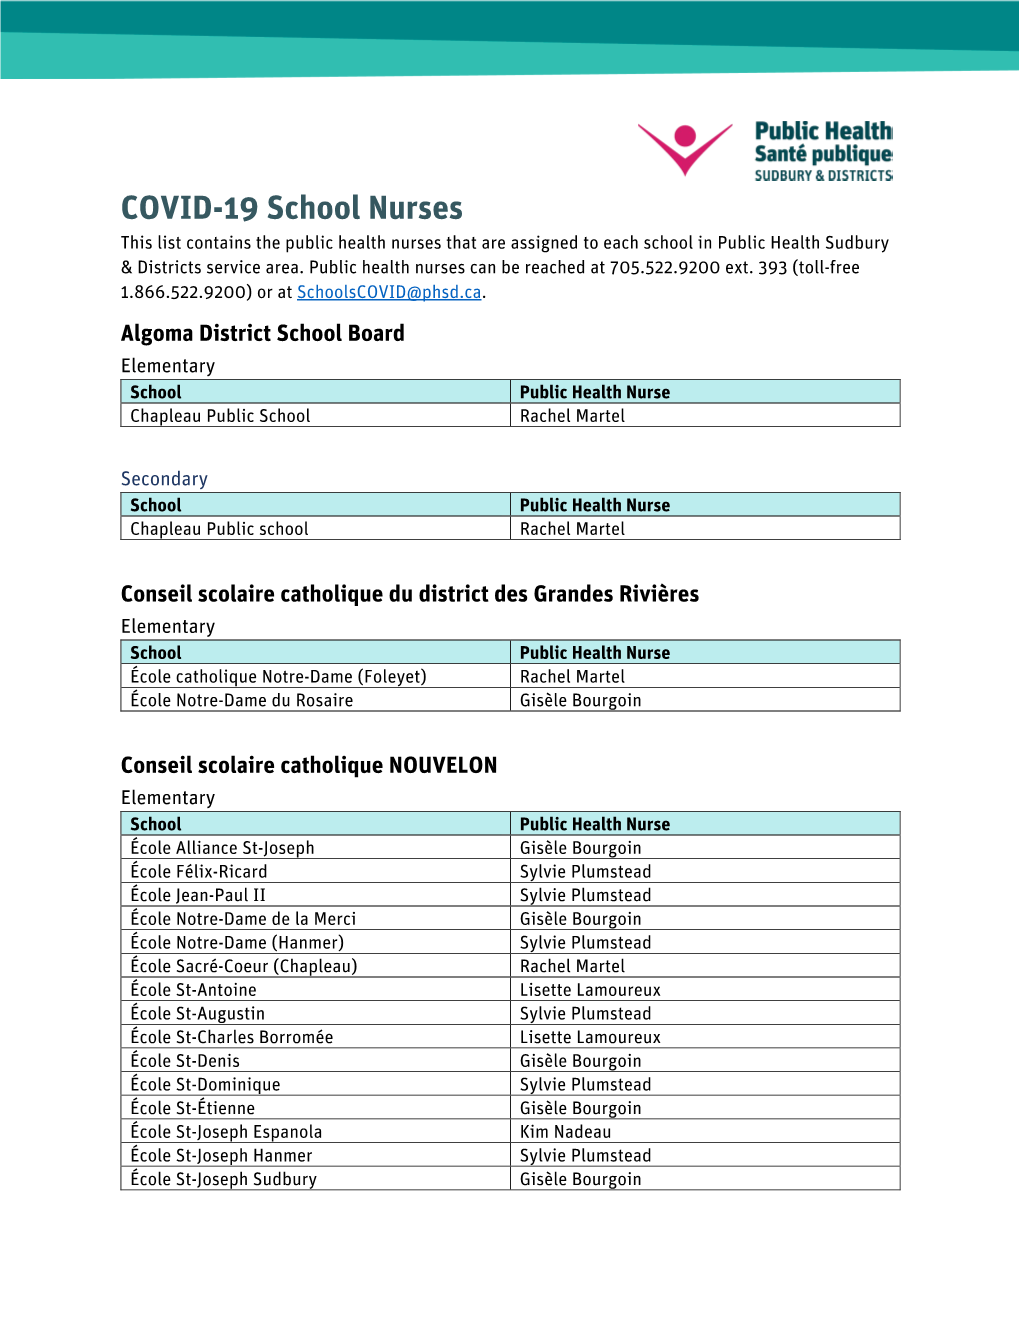 COVID-19 School Nurses This List Contains the Public Health Nurses That Are Assigned to Each School in Public Health Sudbury & Districts Service Area